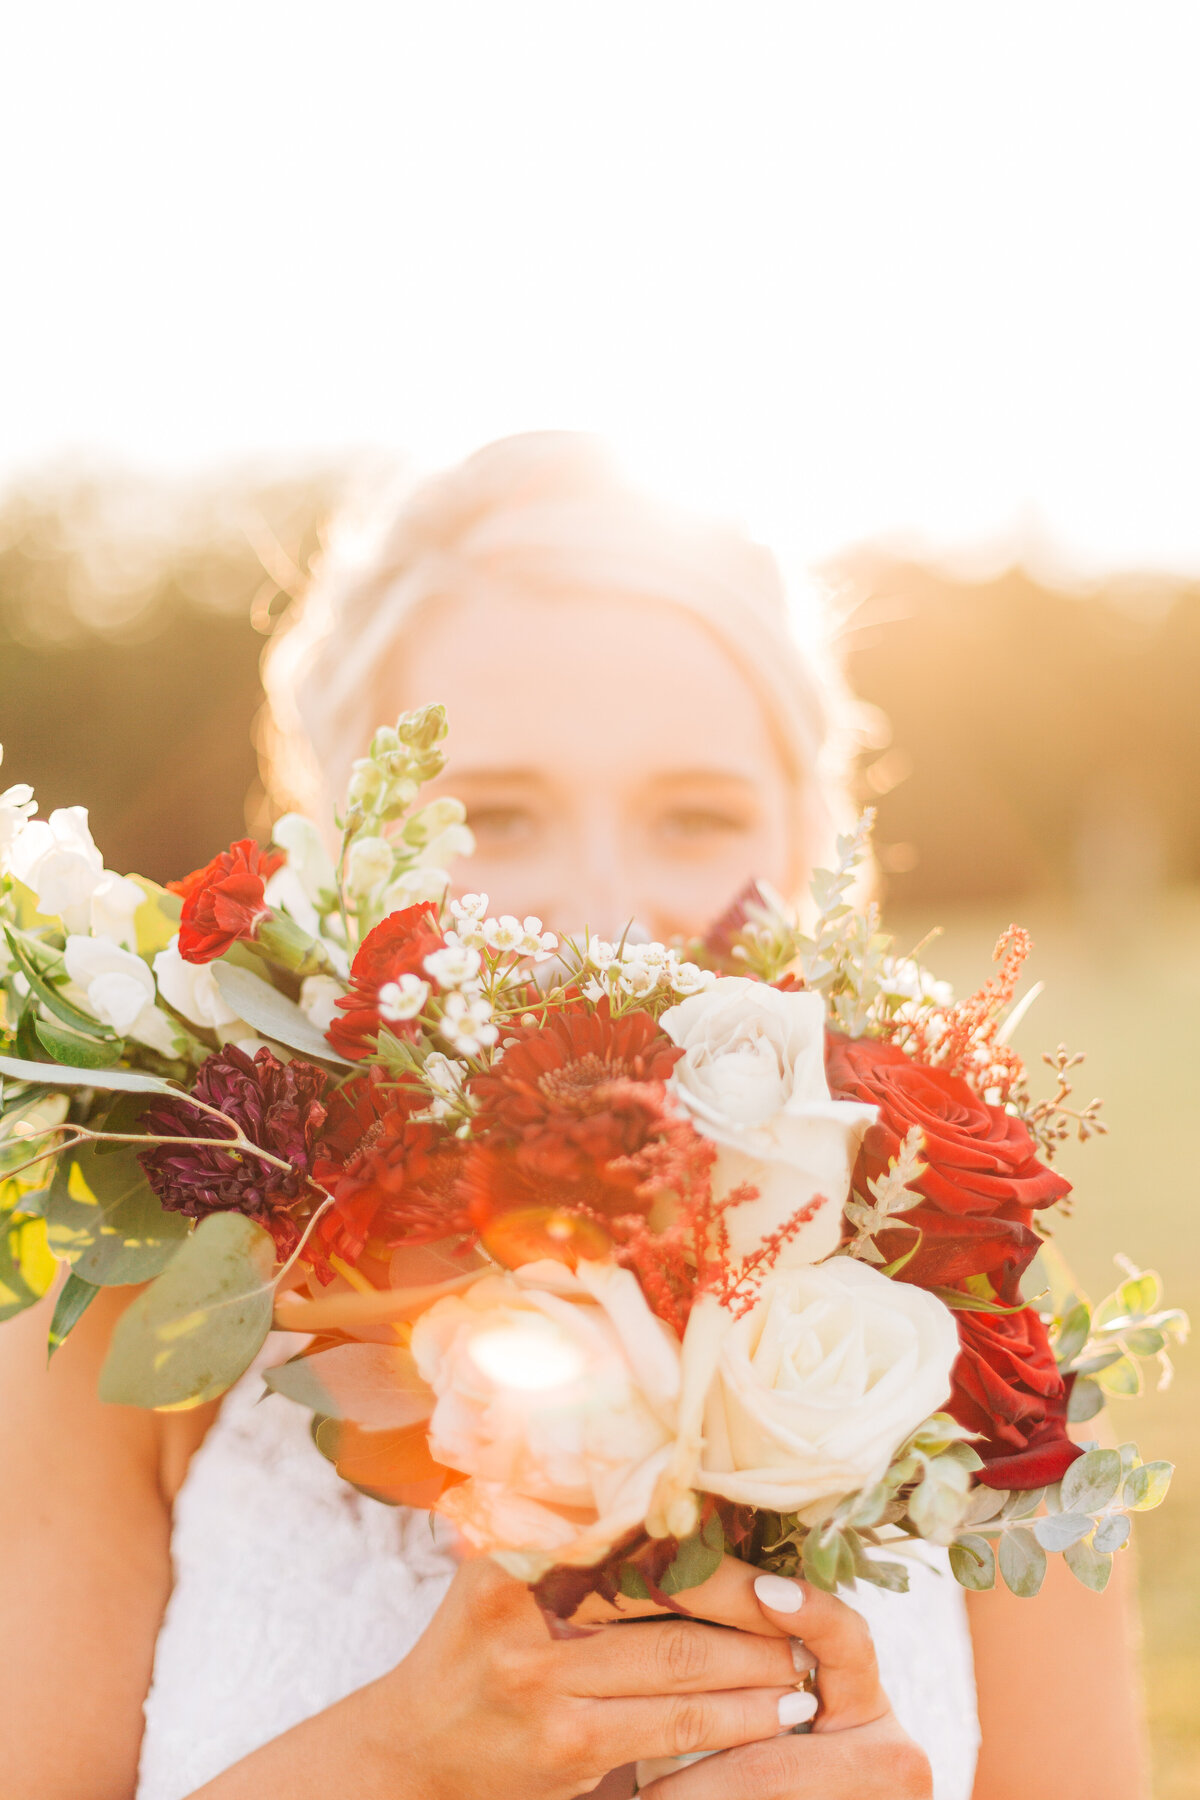 Bride holding her bouquet during golden hour sun